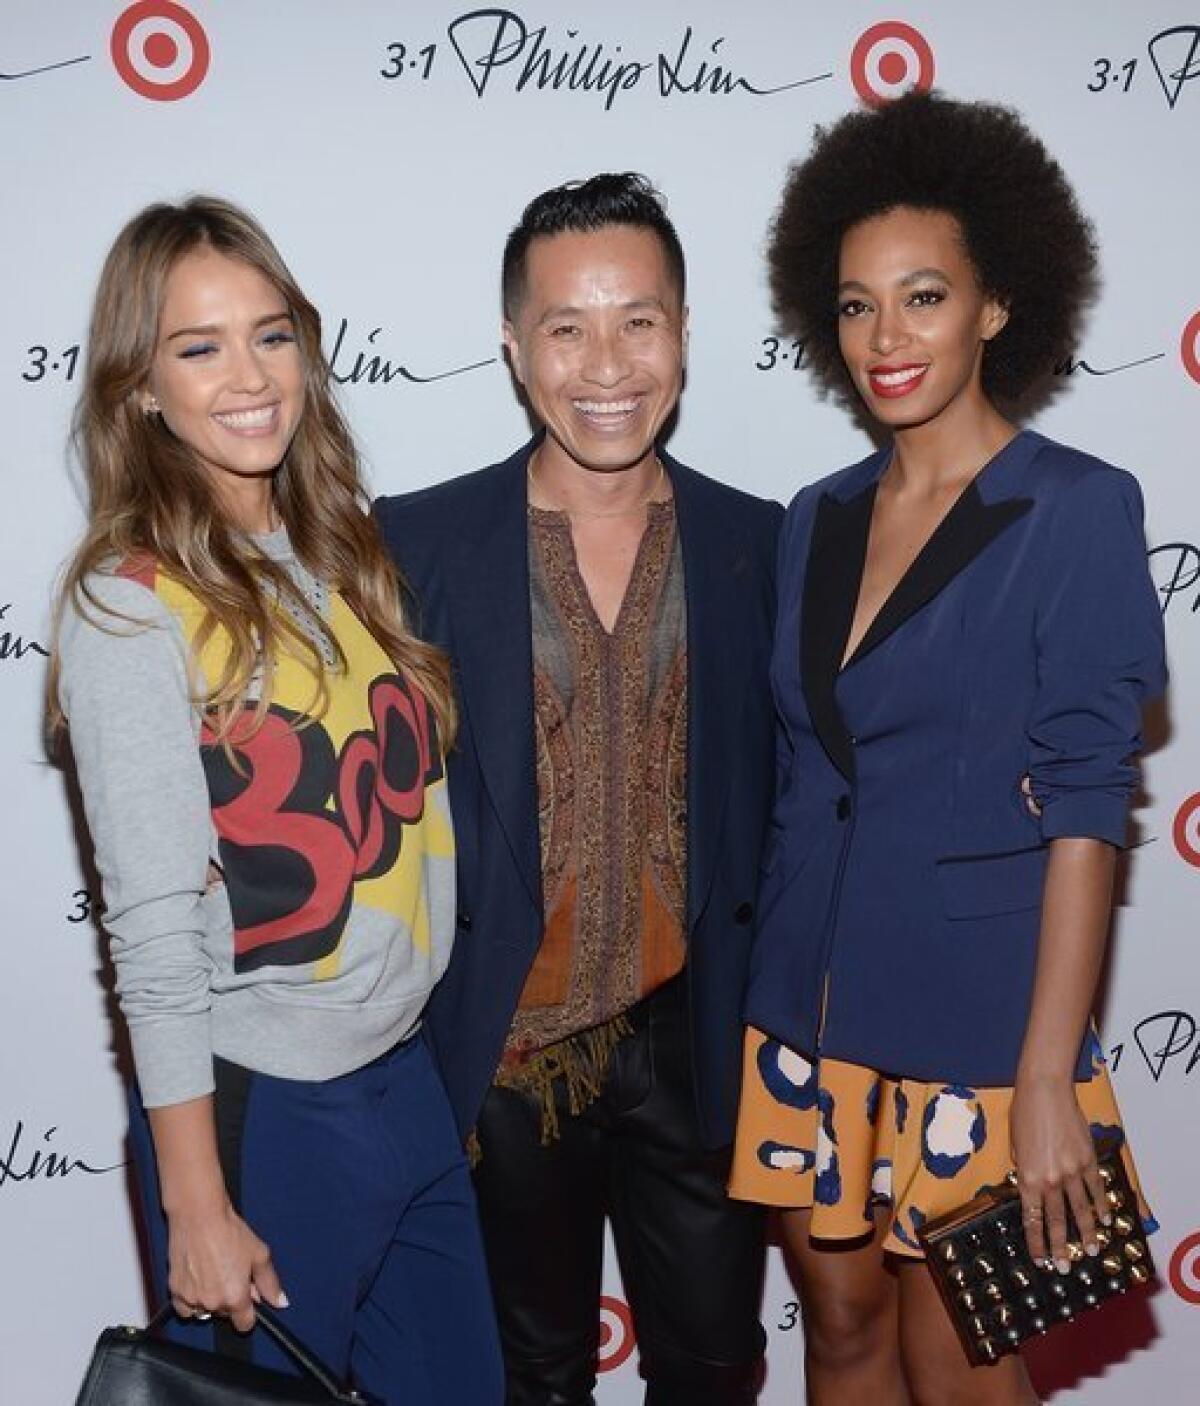 Jessica Alba, designer Phillip Lim and Solange Knowles attend the 3.1 Phillip Lim for Target launch party on Sept. 5. The collection debuts in stores Sunday.